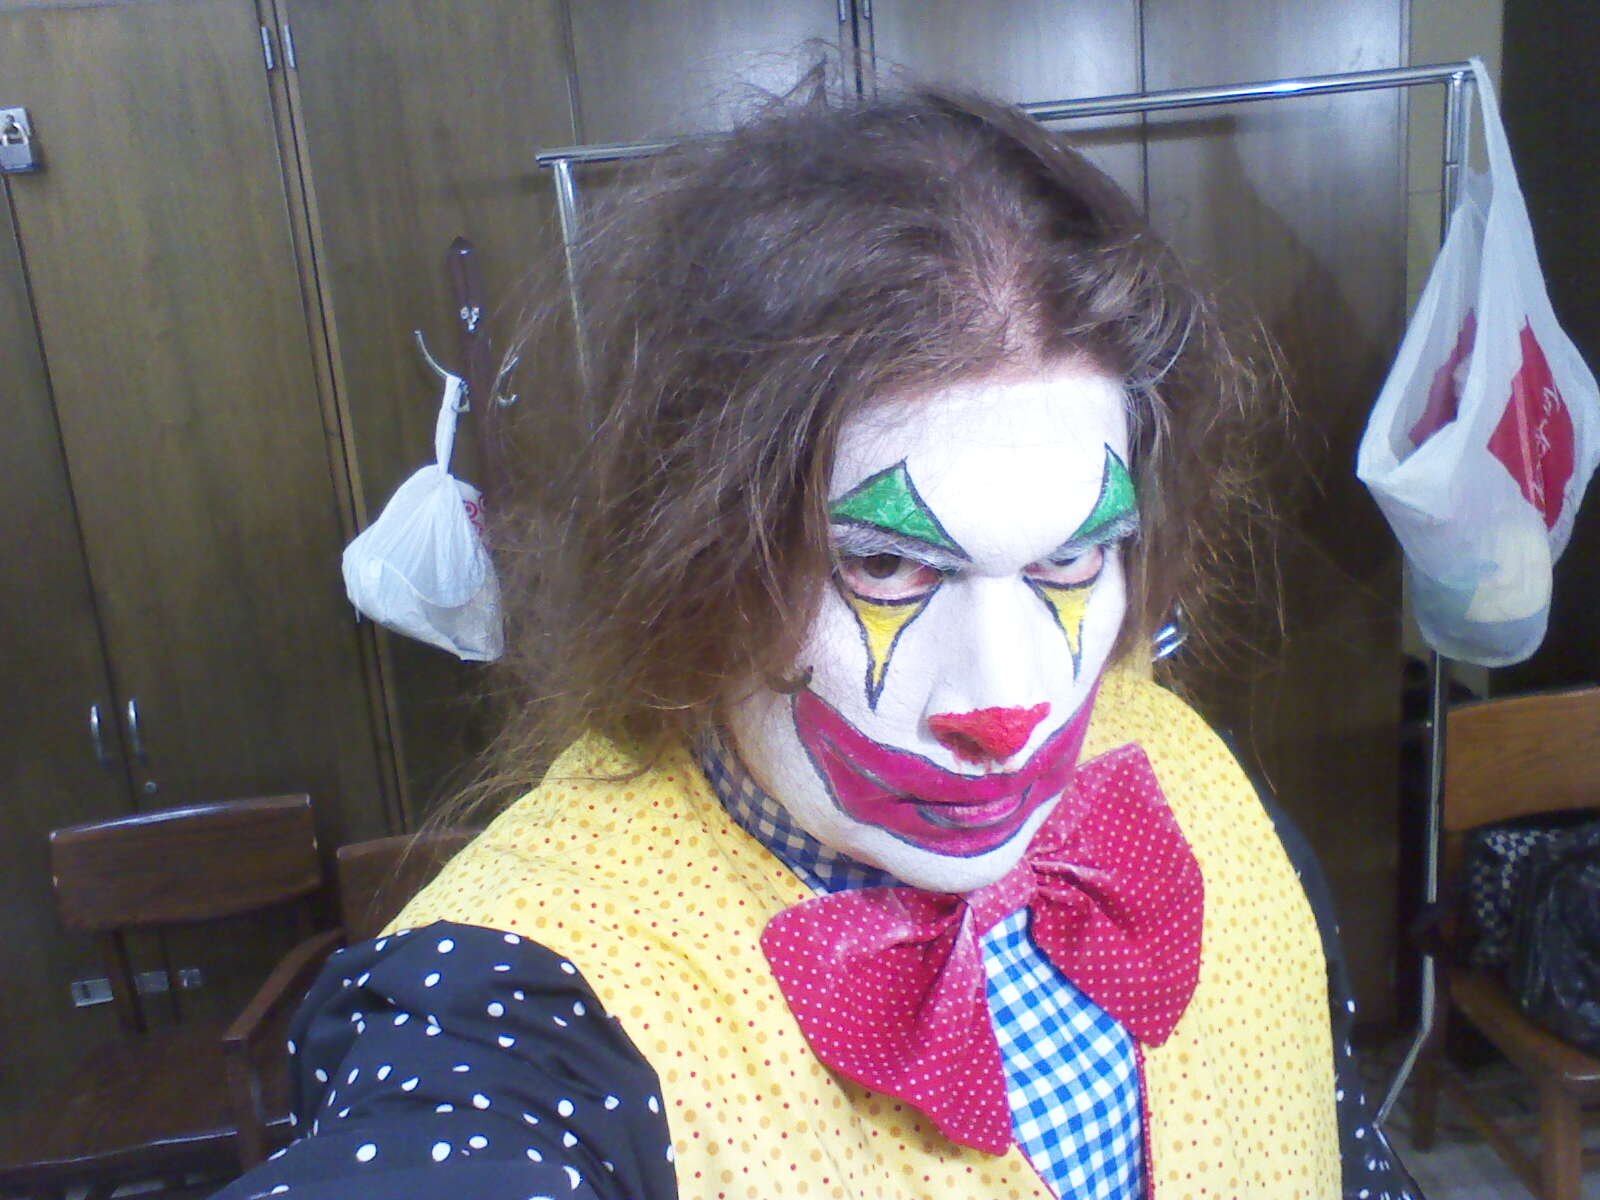 Photo self-taken with cell phone backstage during theater production, 